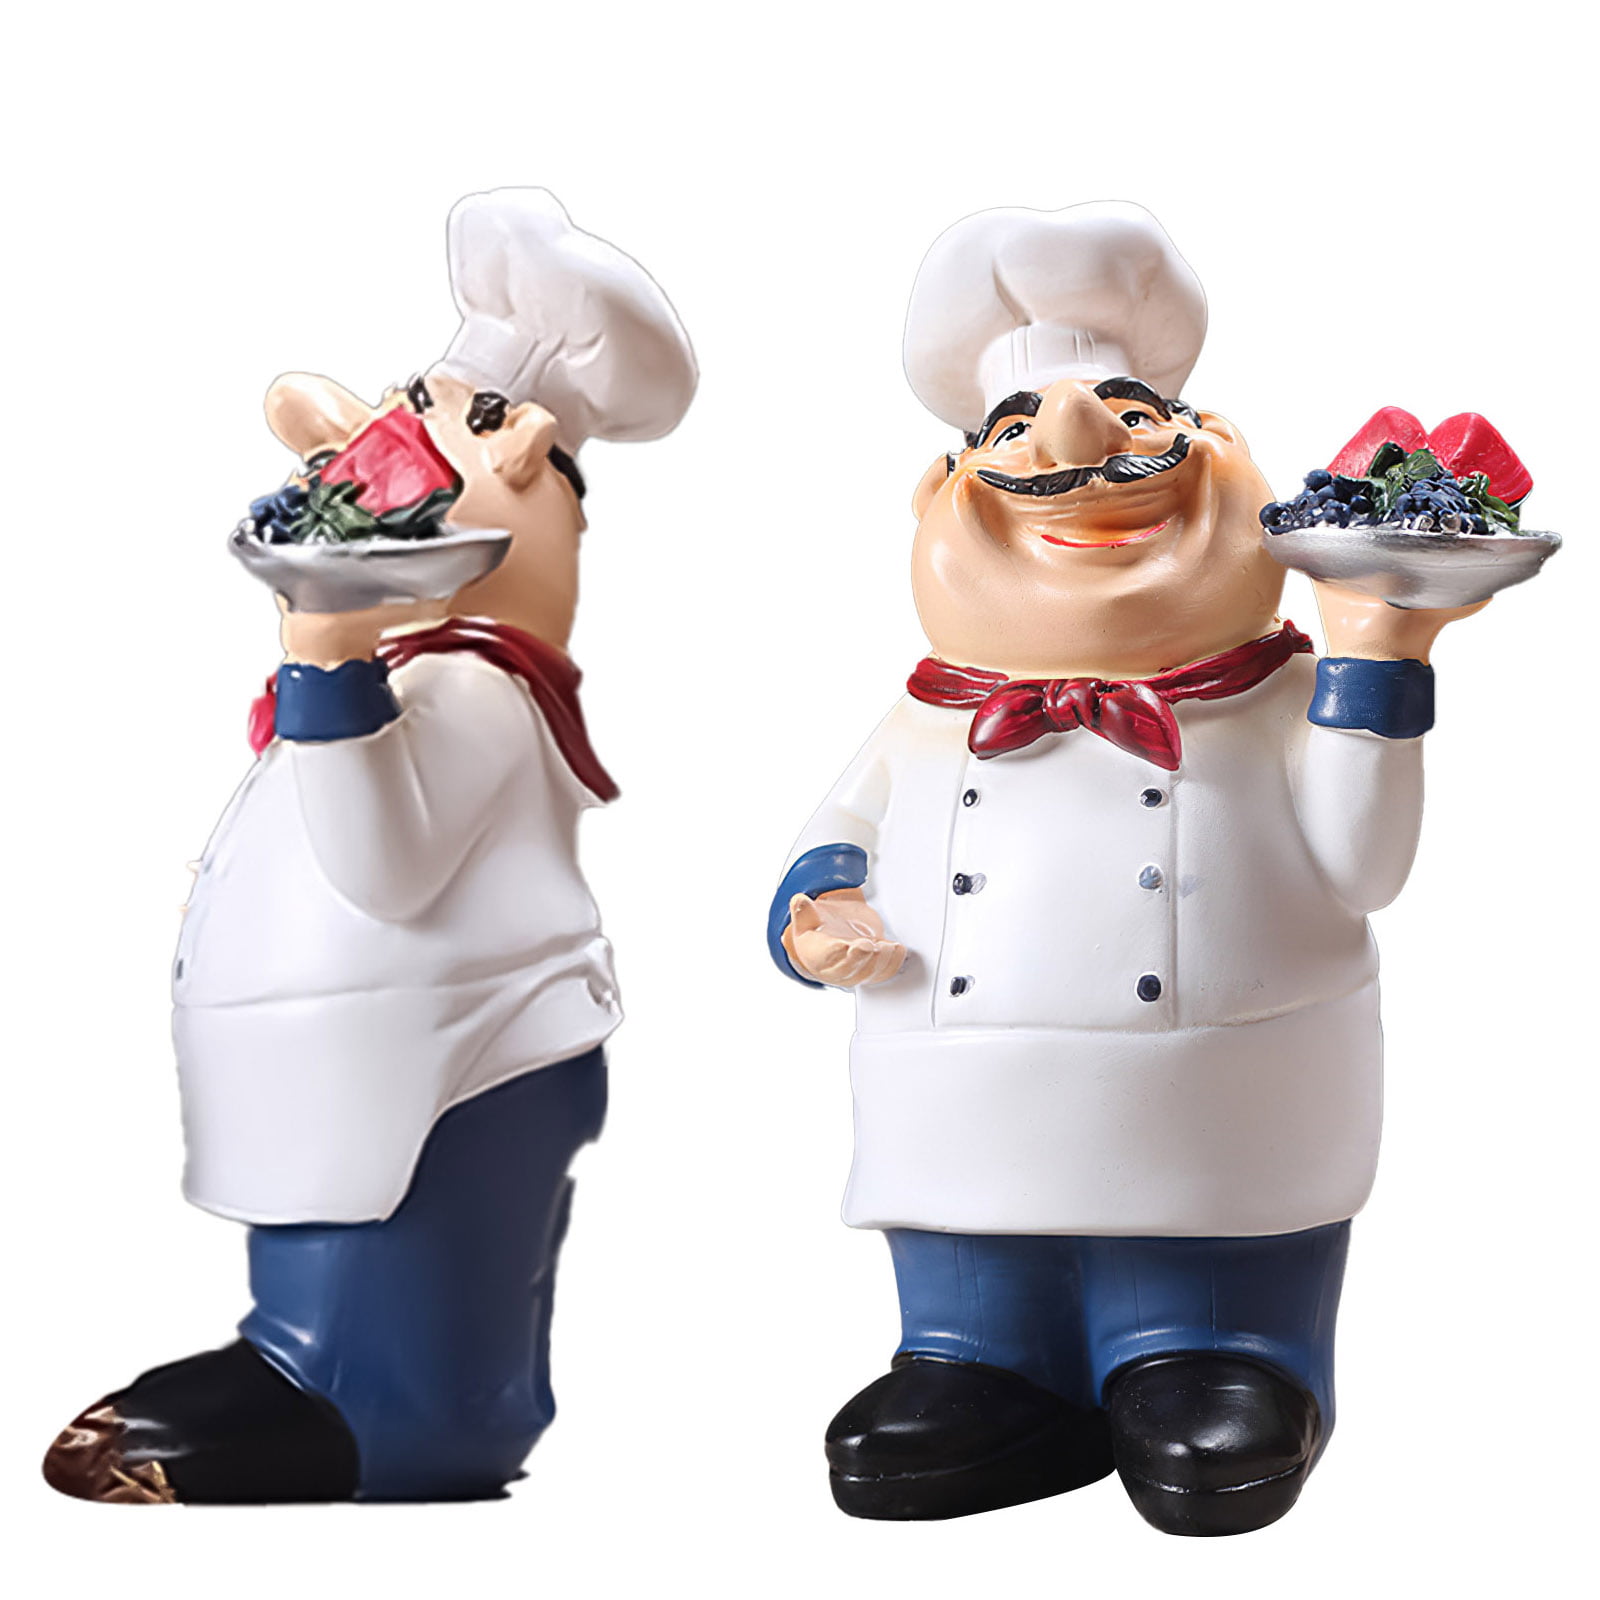 Resin Ornaments,Cook Statue,Chef Figurines for Kitchen Restaurant Cafe Decor 